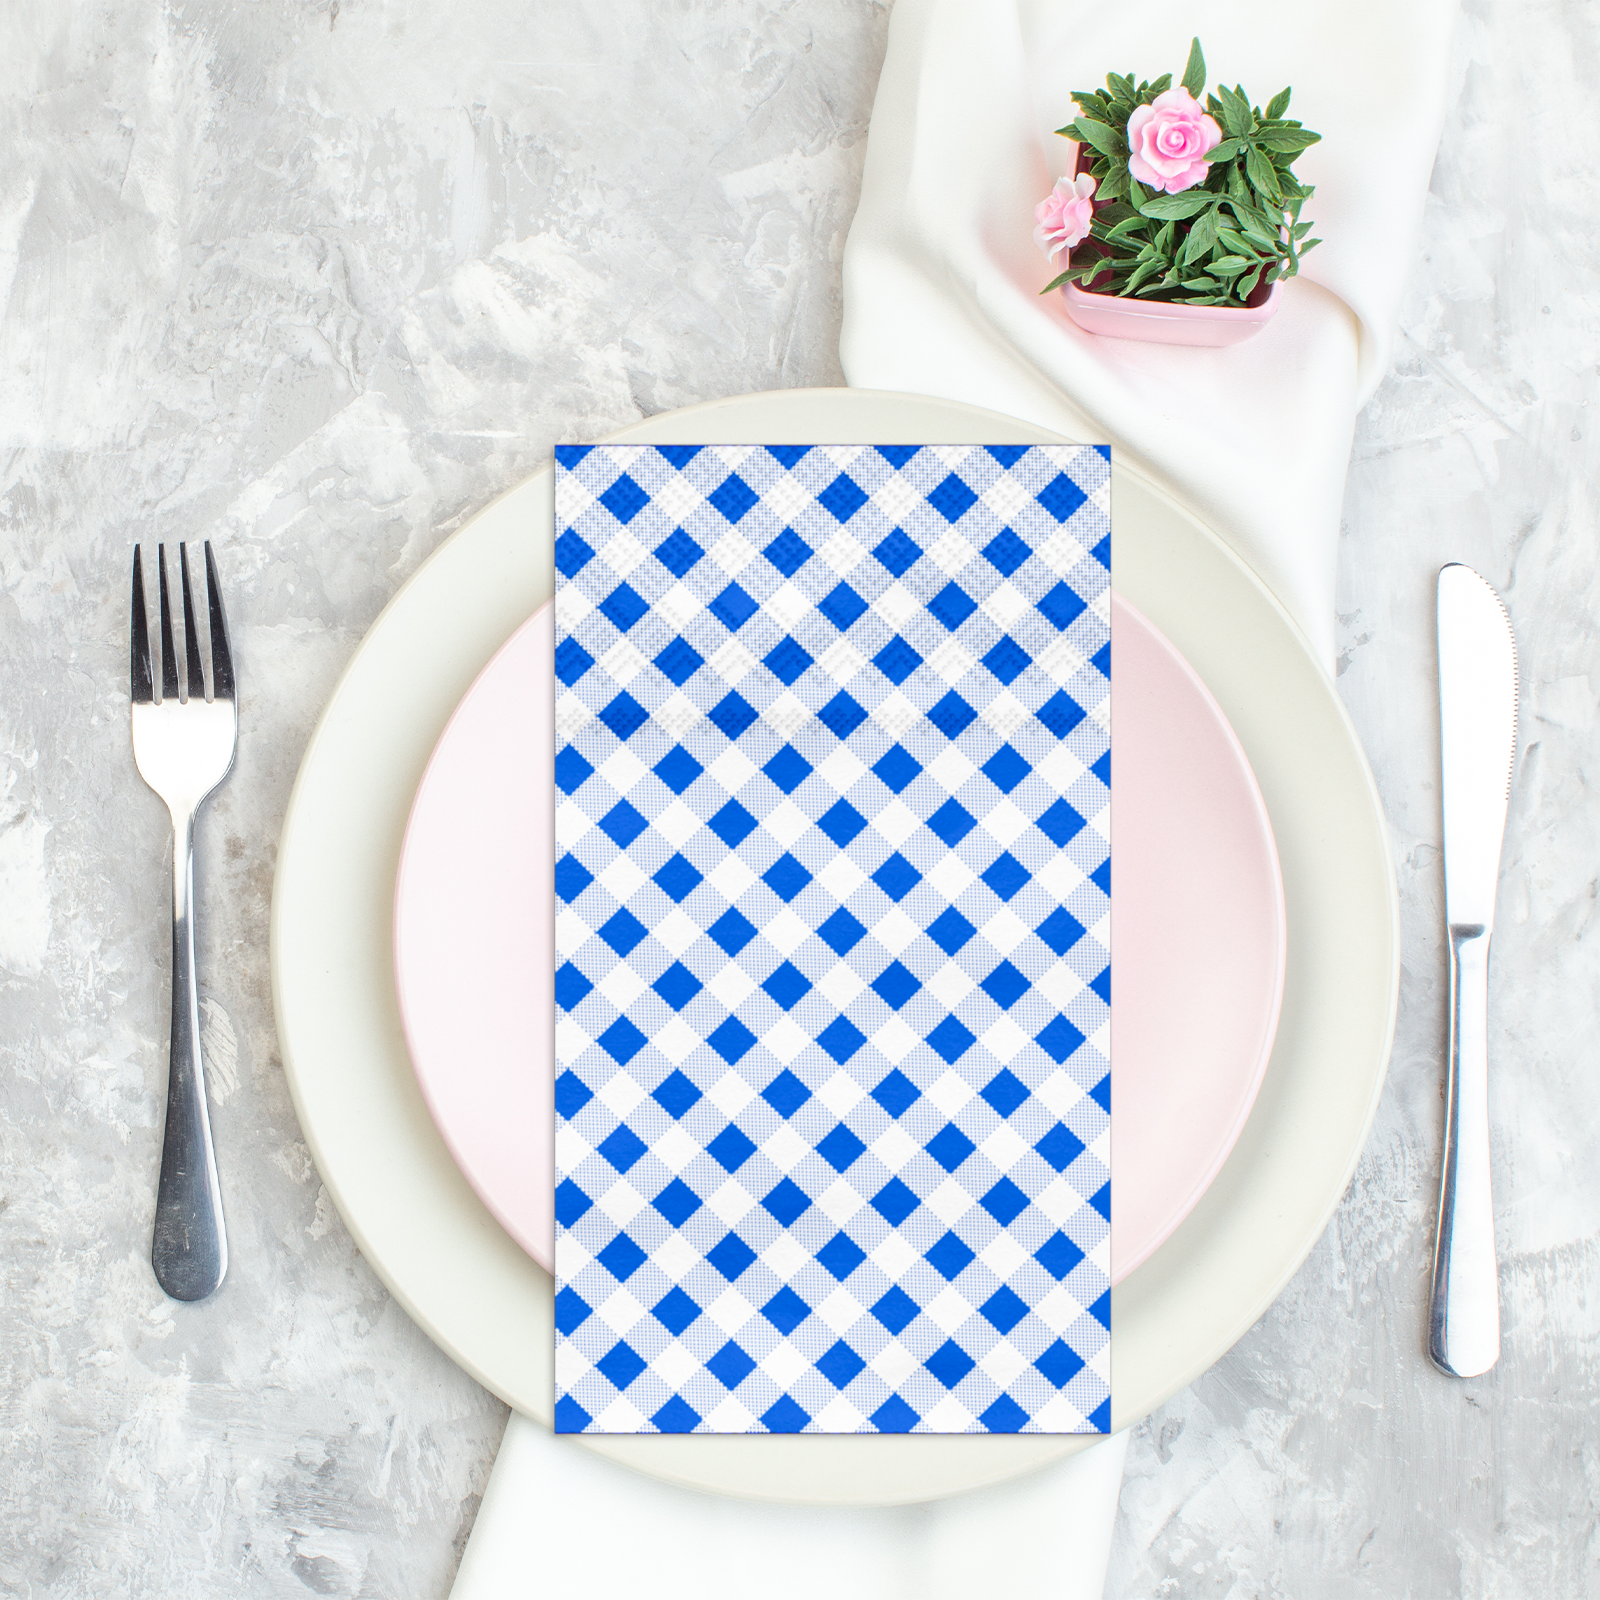 DYLIVeS 50 Count Gingham Dinner Napkins 3 Ply Disposable Paper Hand Napkins Blue Buffalo plaid Napkins Disposable Towels Blue and White Checkered Guest Napkins - image 4 of 7